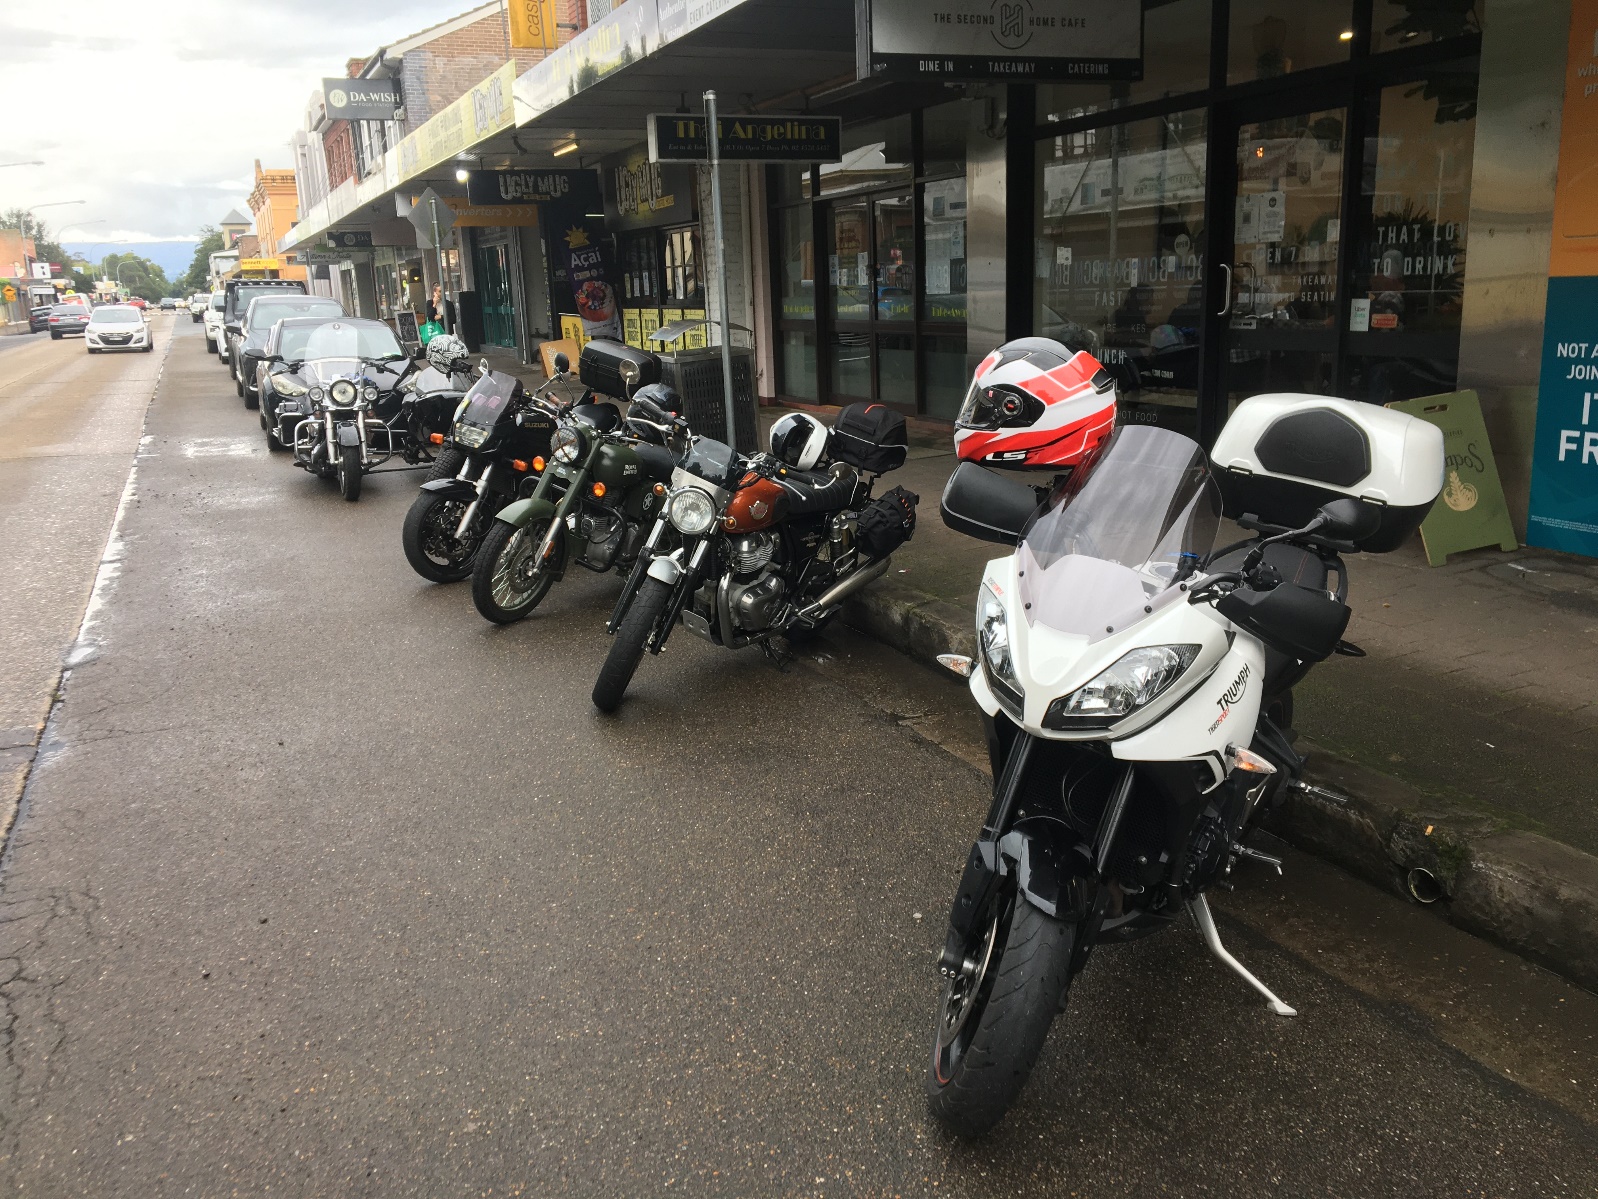 Motorcycles parked on the side of a street

Description automatically generated